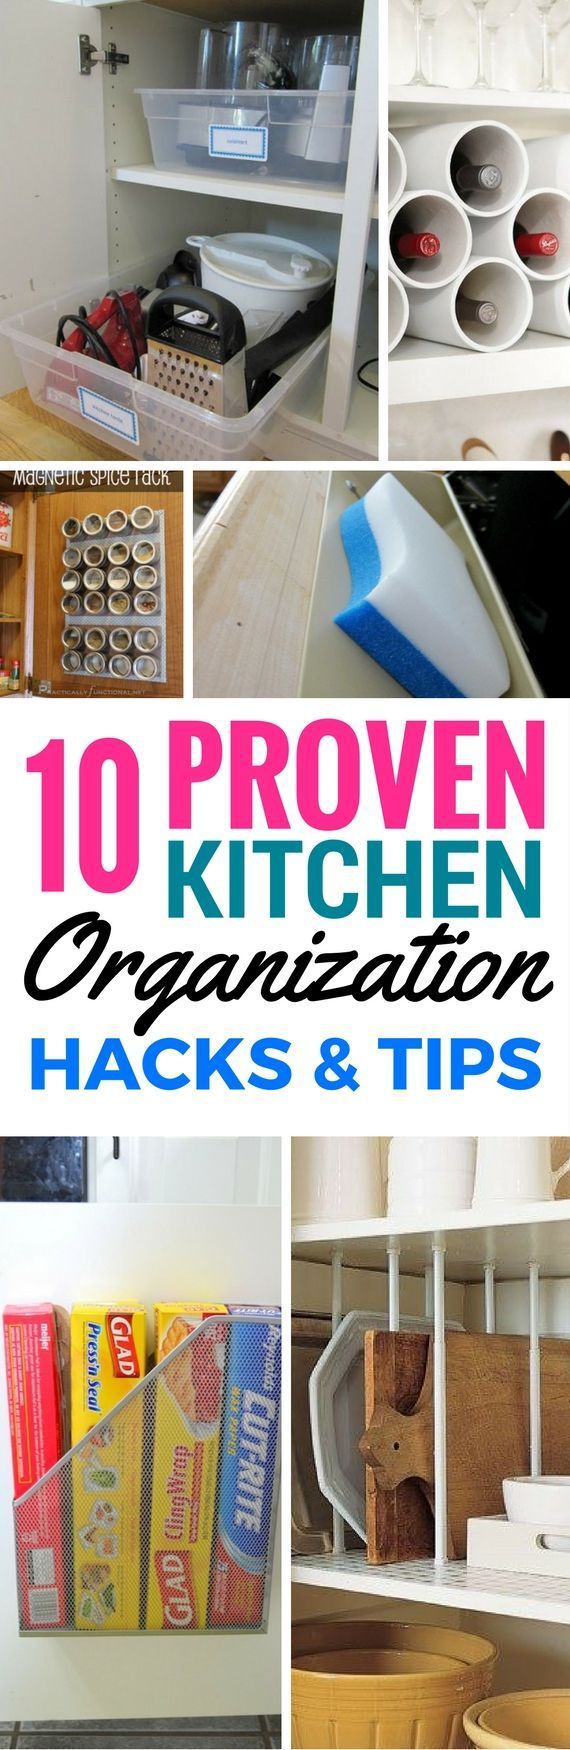 10 DIY Kitchen Organization Ideas For The Home – Absolutely epic ways to easily organize your kitchen that are cheap and quick!